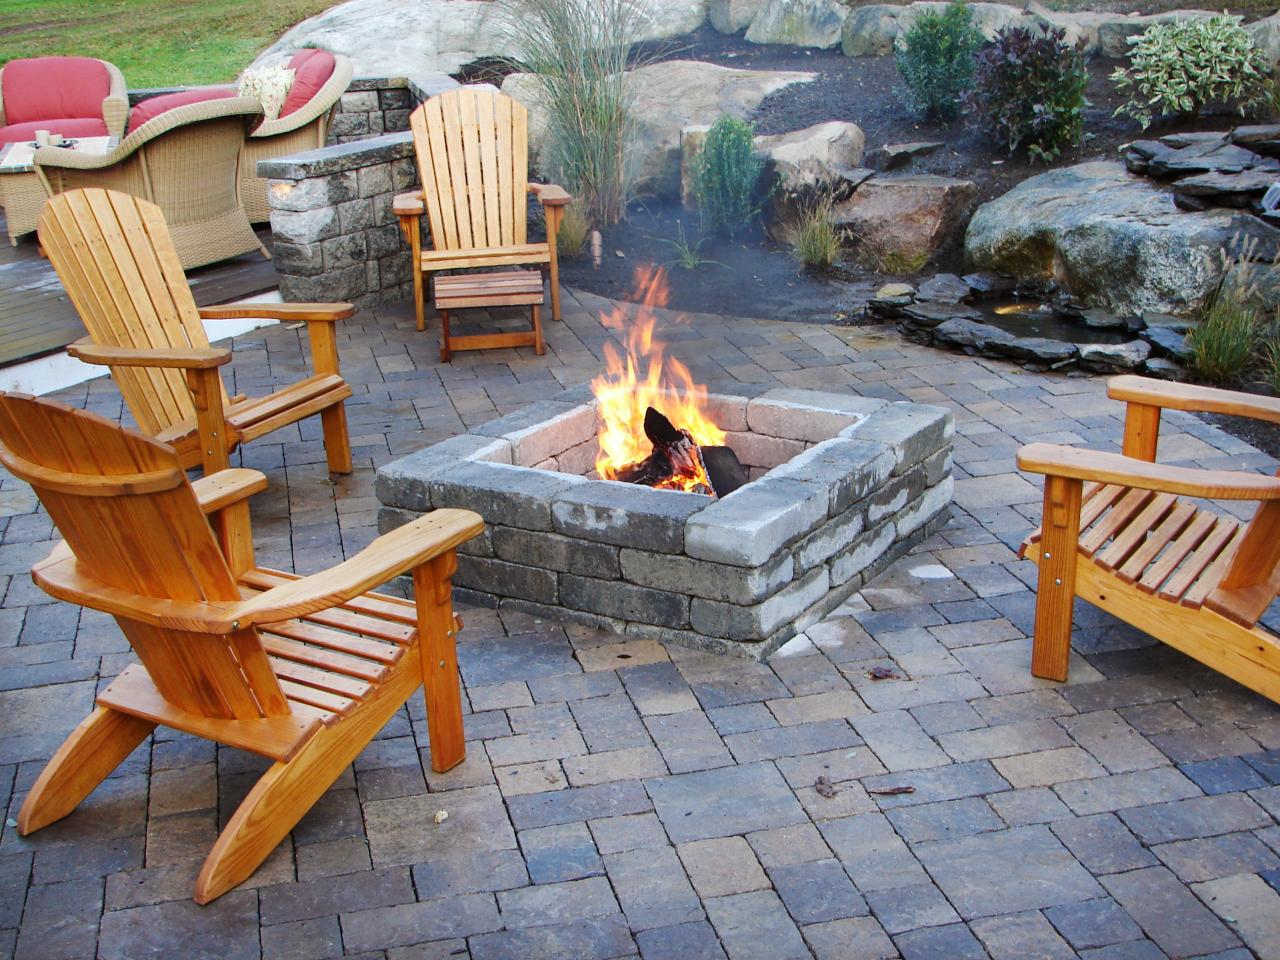 Find ideas for outdoor fire pit and fireplace designs that let you get as simple or as fancy as your time and budget allow